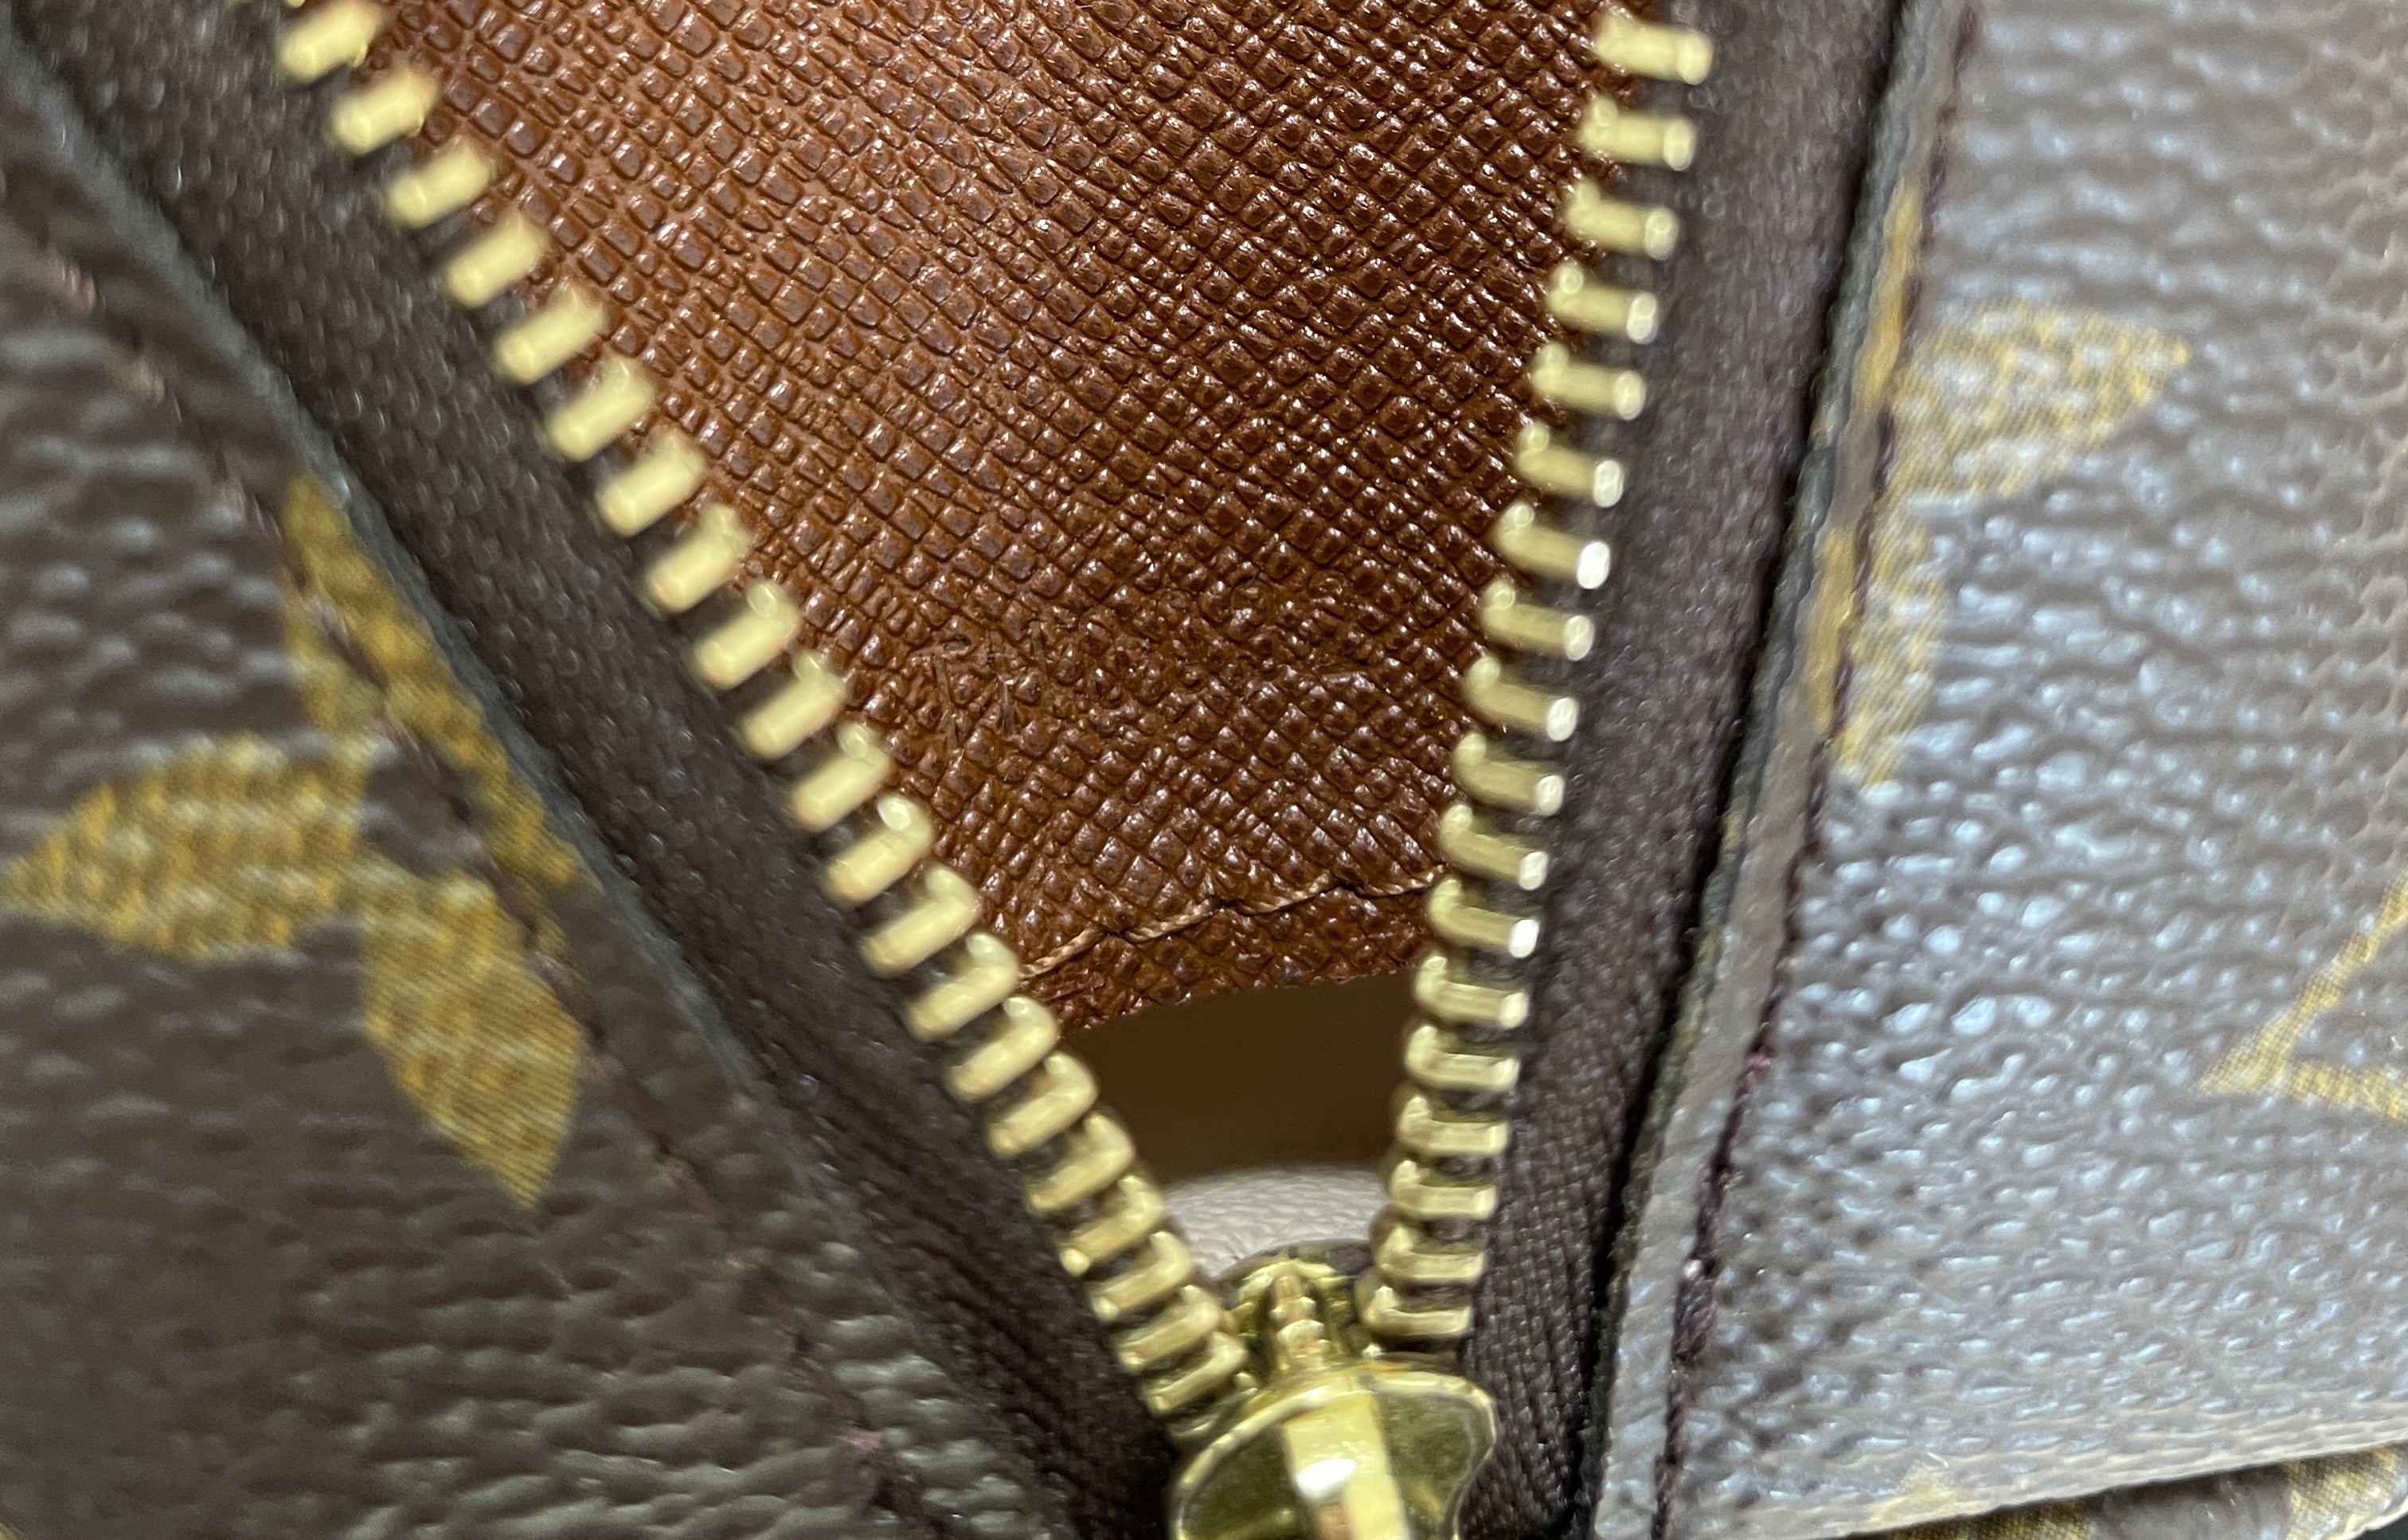 Louis Vuitton Demi Ronde Pouch Used (7156)